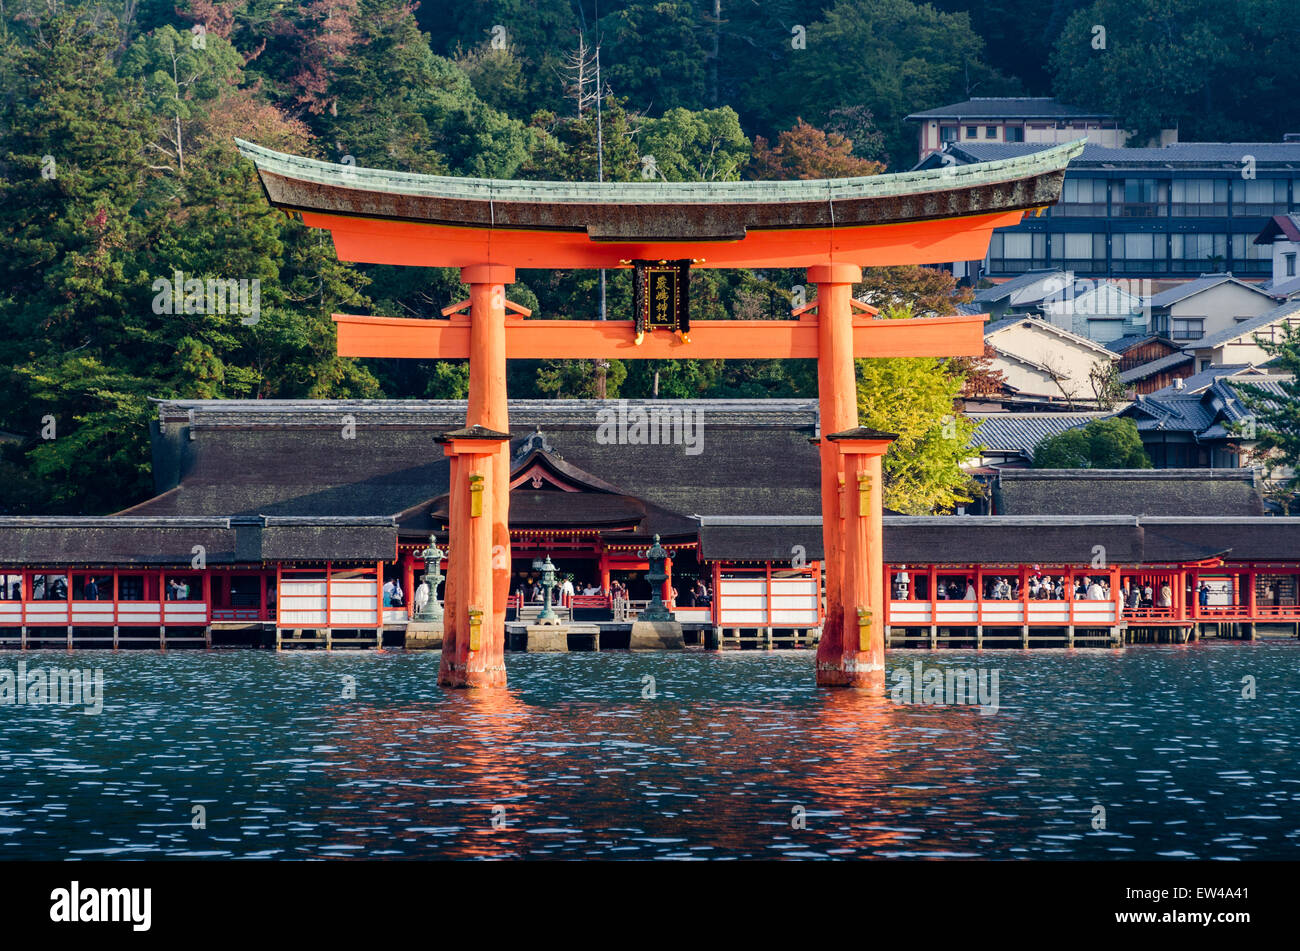 The famous 'floating' torii gate at Itsukushima, in Hiroshima Prefecture Japan. Stock Photo